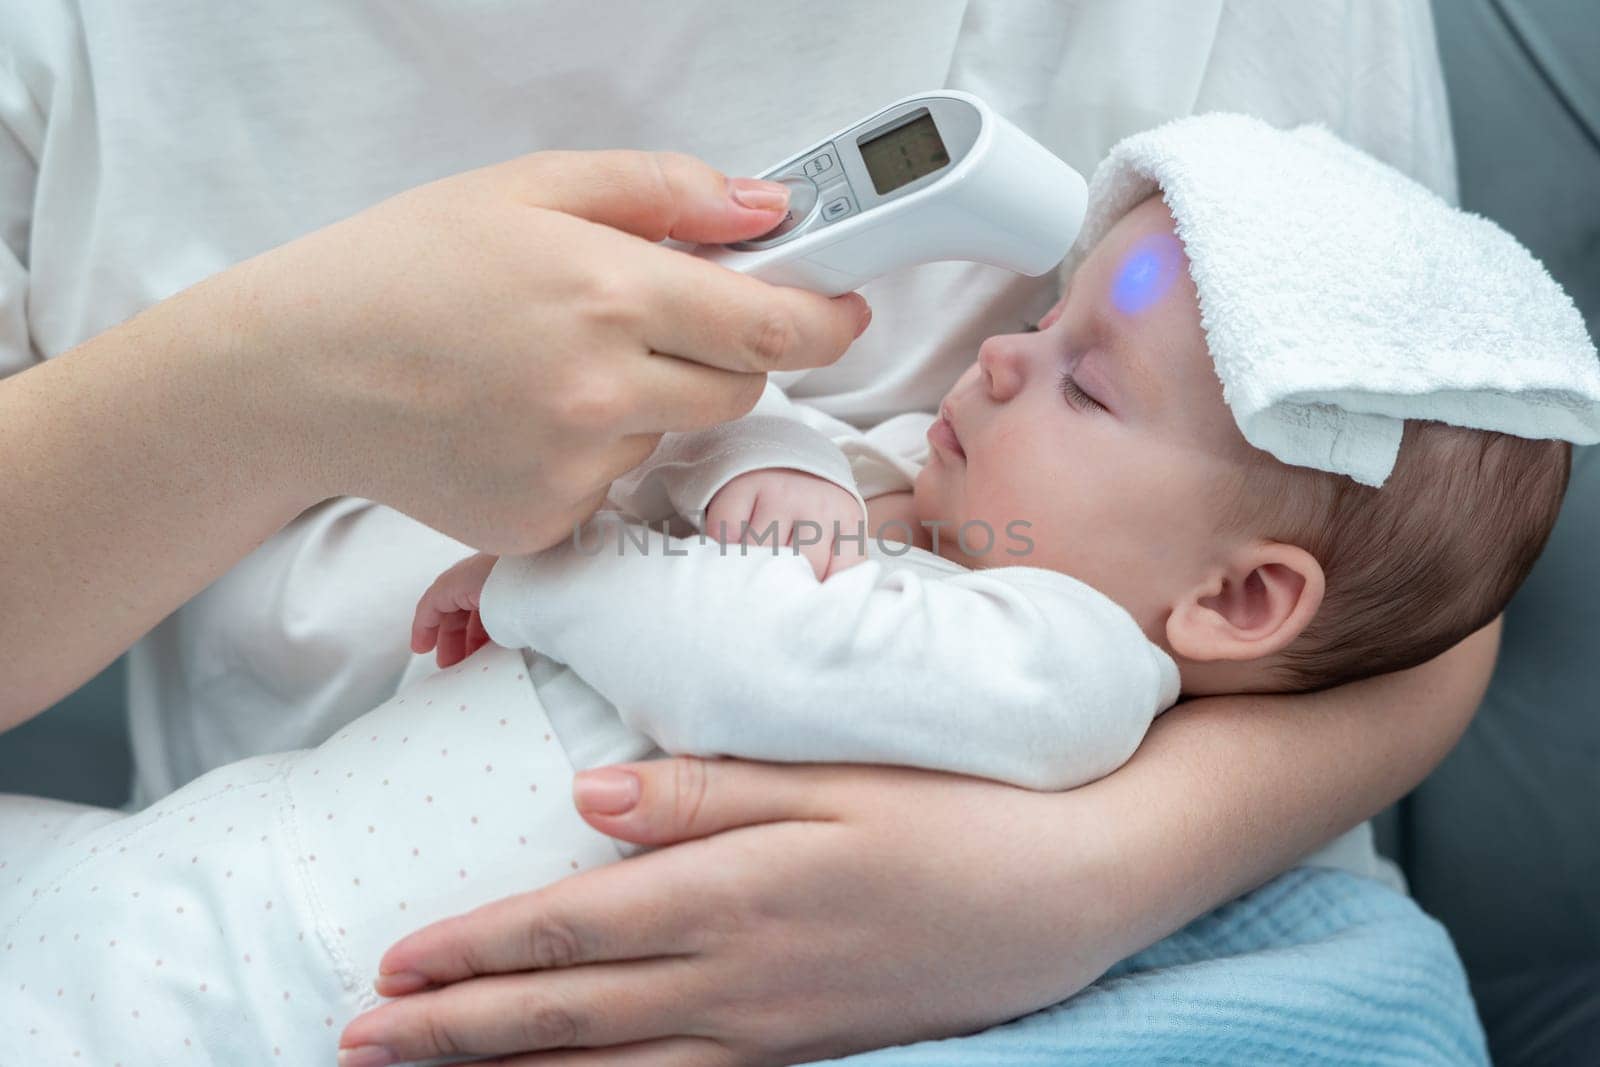 A devoted mother trusts an electronic thermometer, ensuring her newborn's health by measuring the